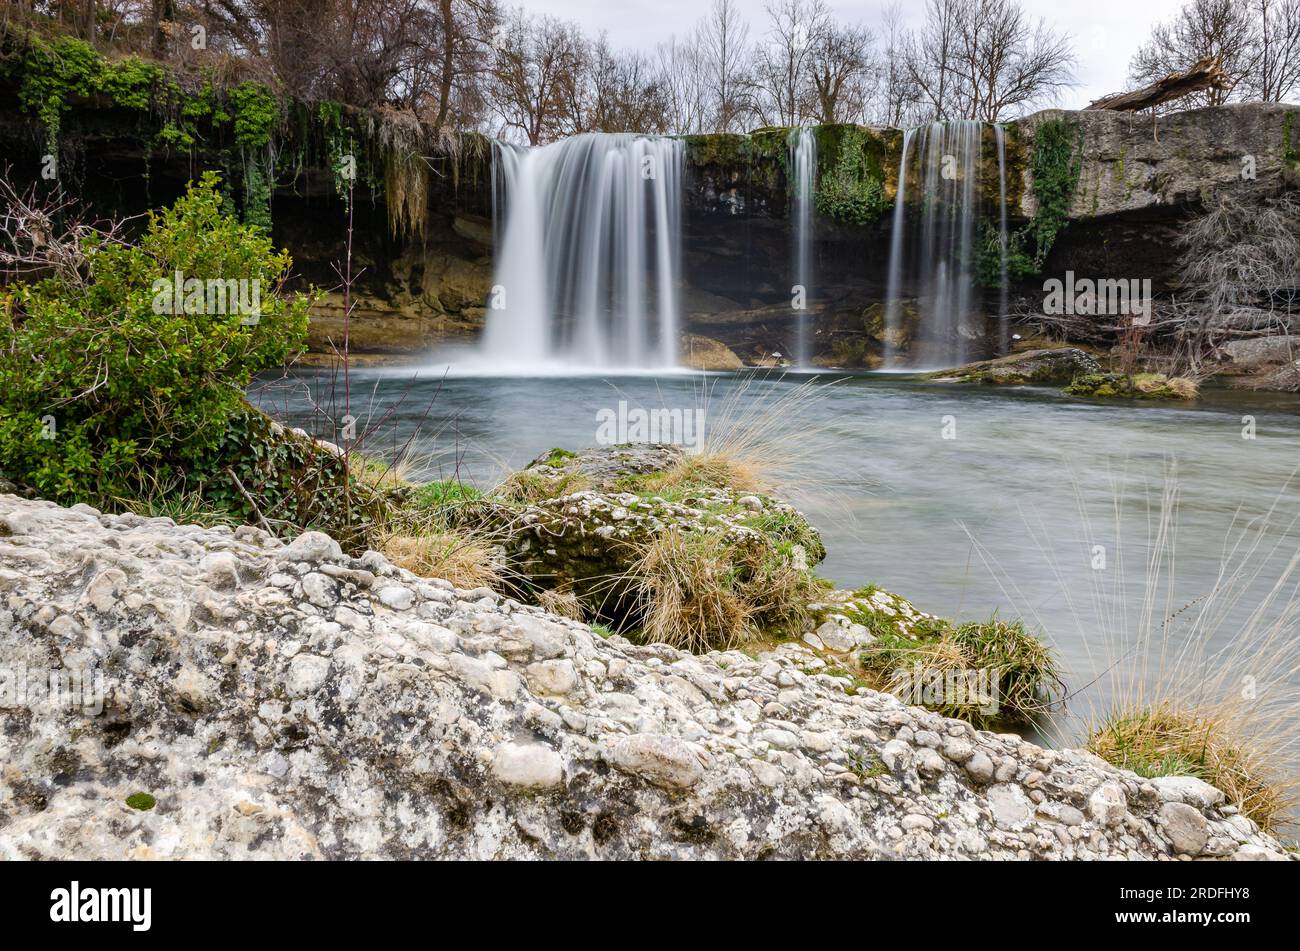 PHOTOGRAPH OF THE PEDROSA DE TOBALINA WATERFALL, TAKEN IN MARCH 2023 Stock Photo